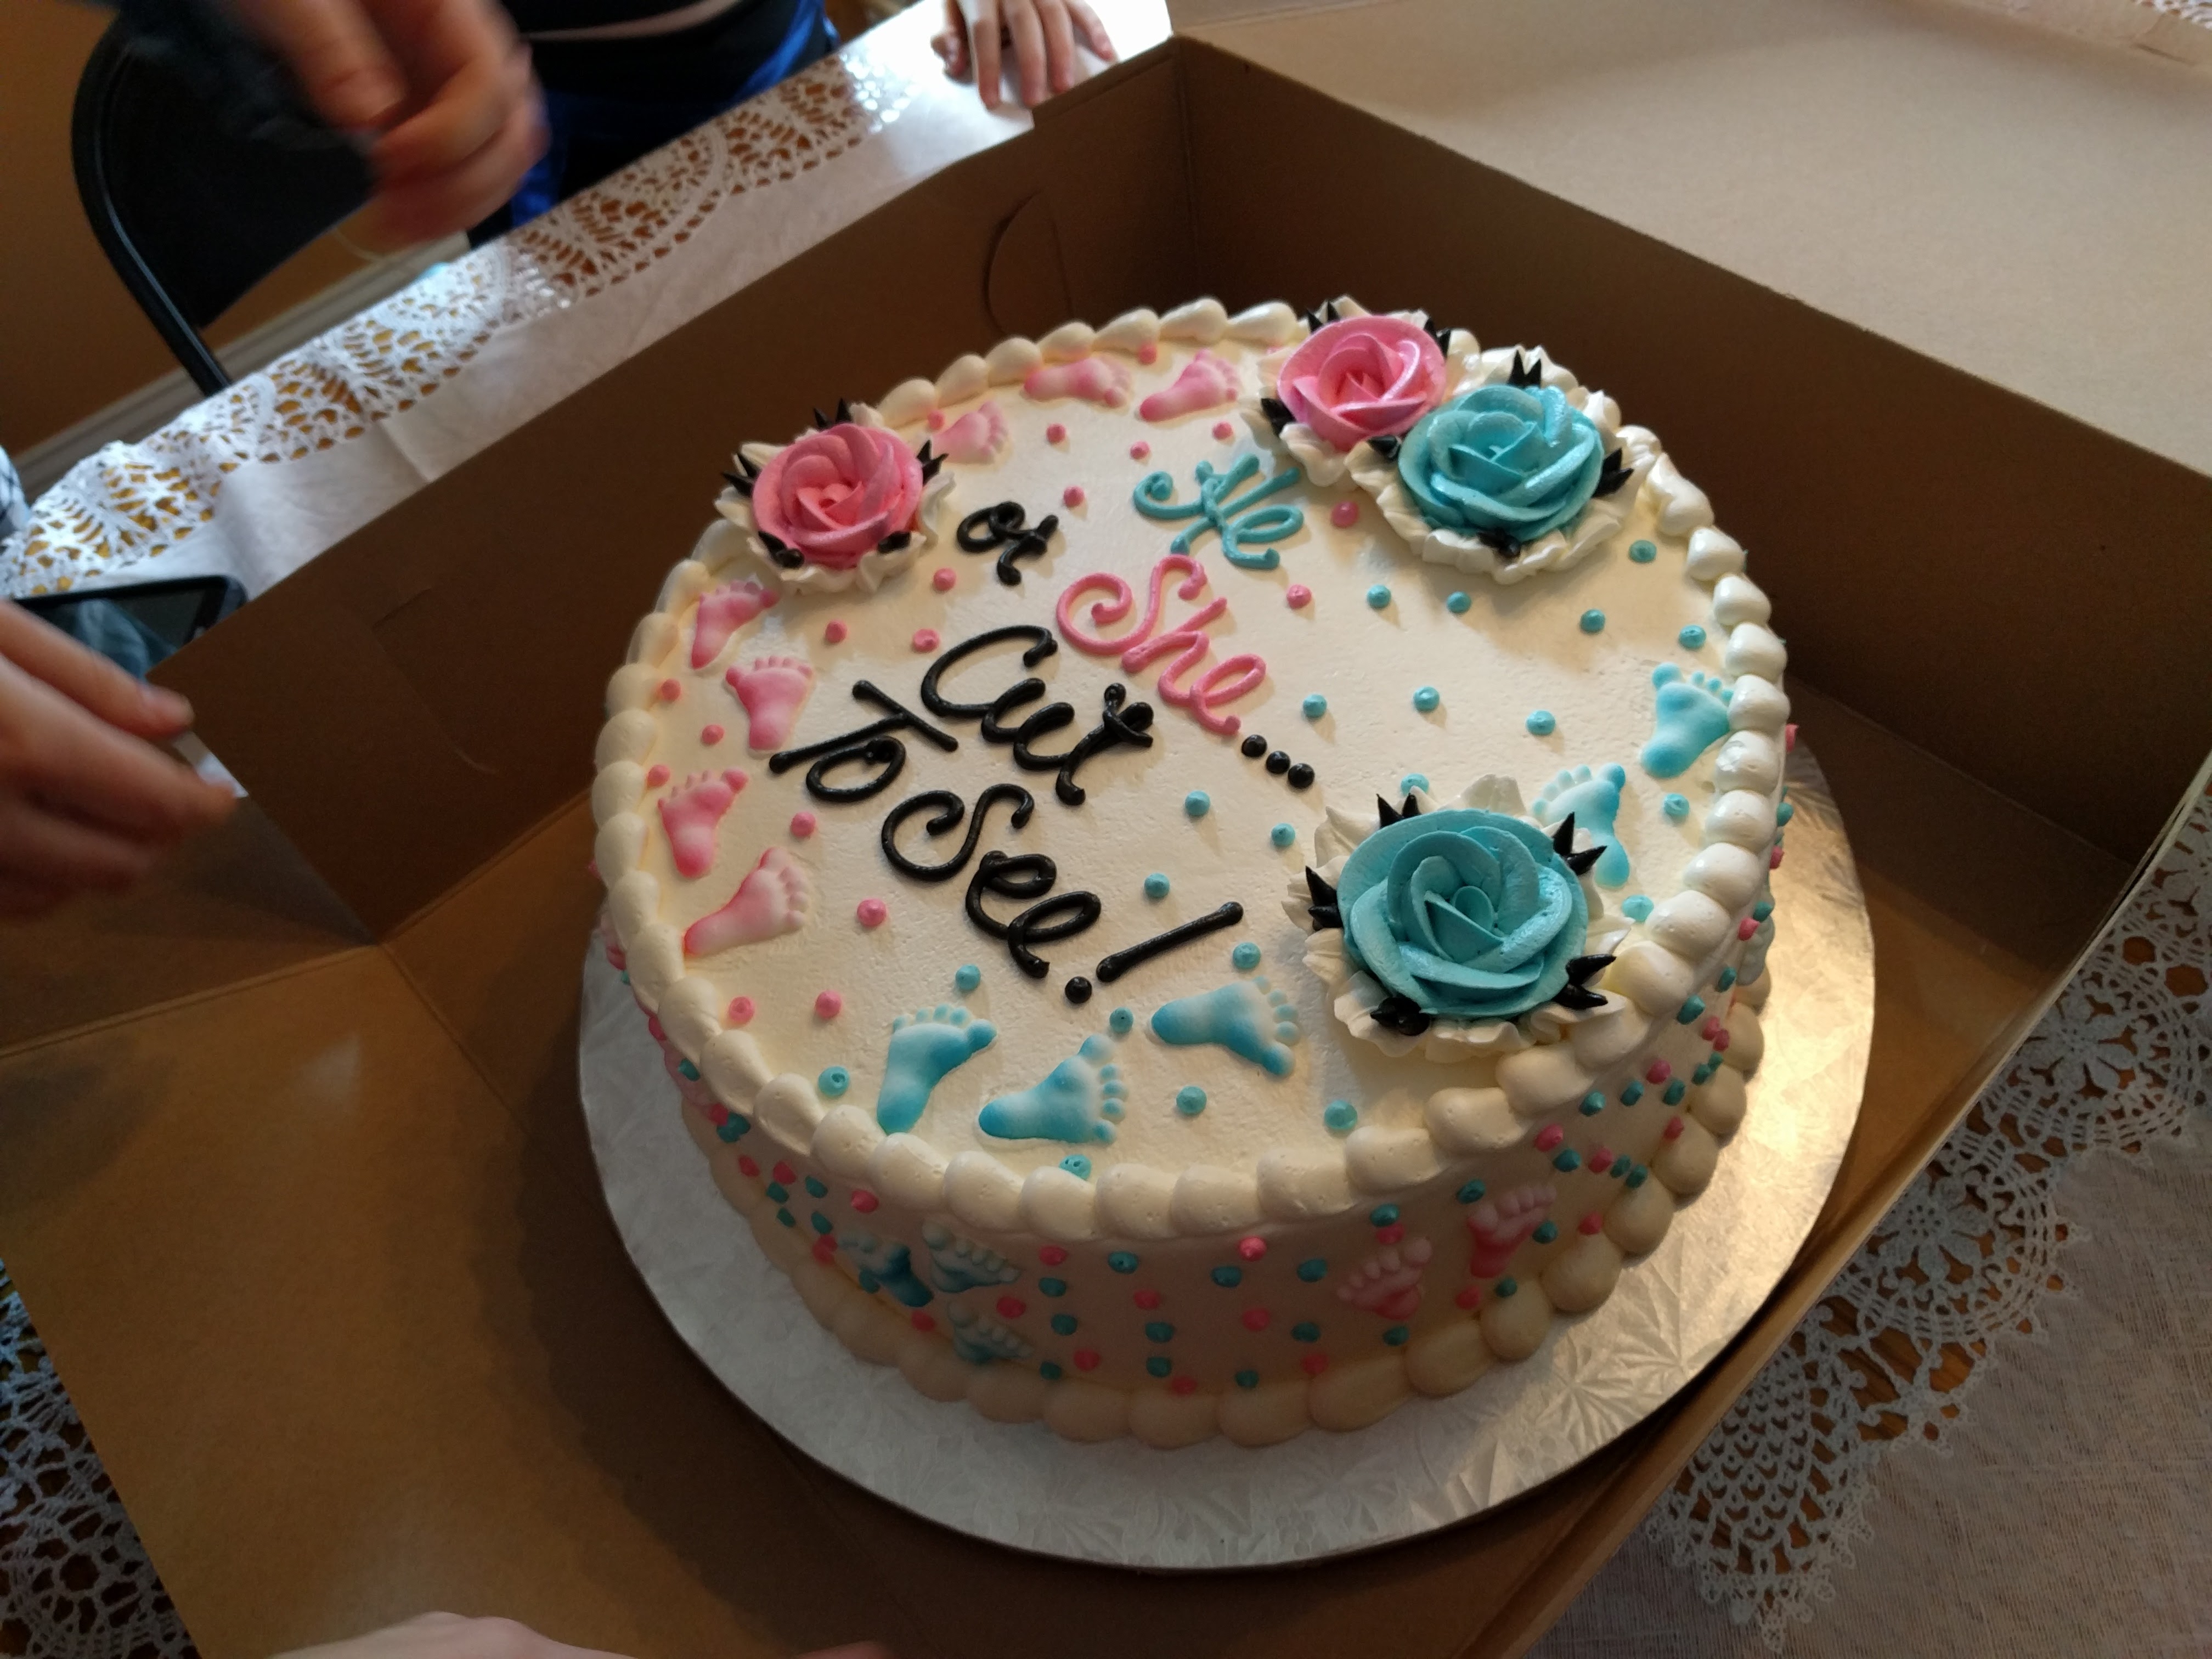 Shown here is a gender-reveal cake that reads "He or she...cut to see!".